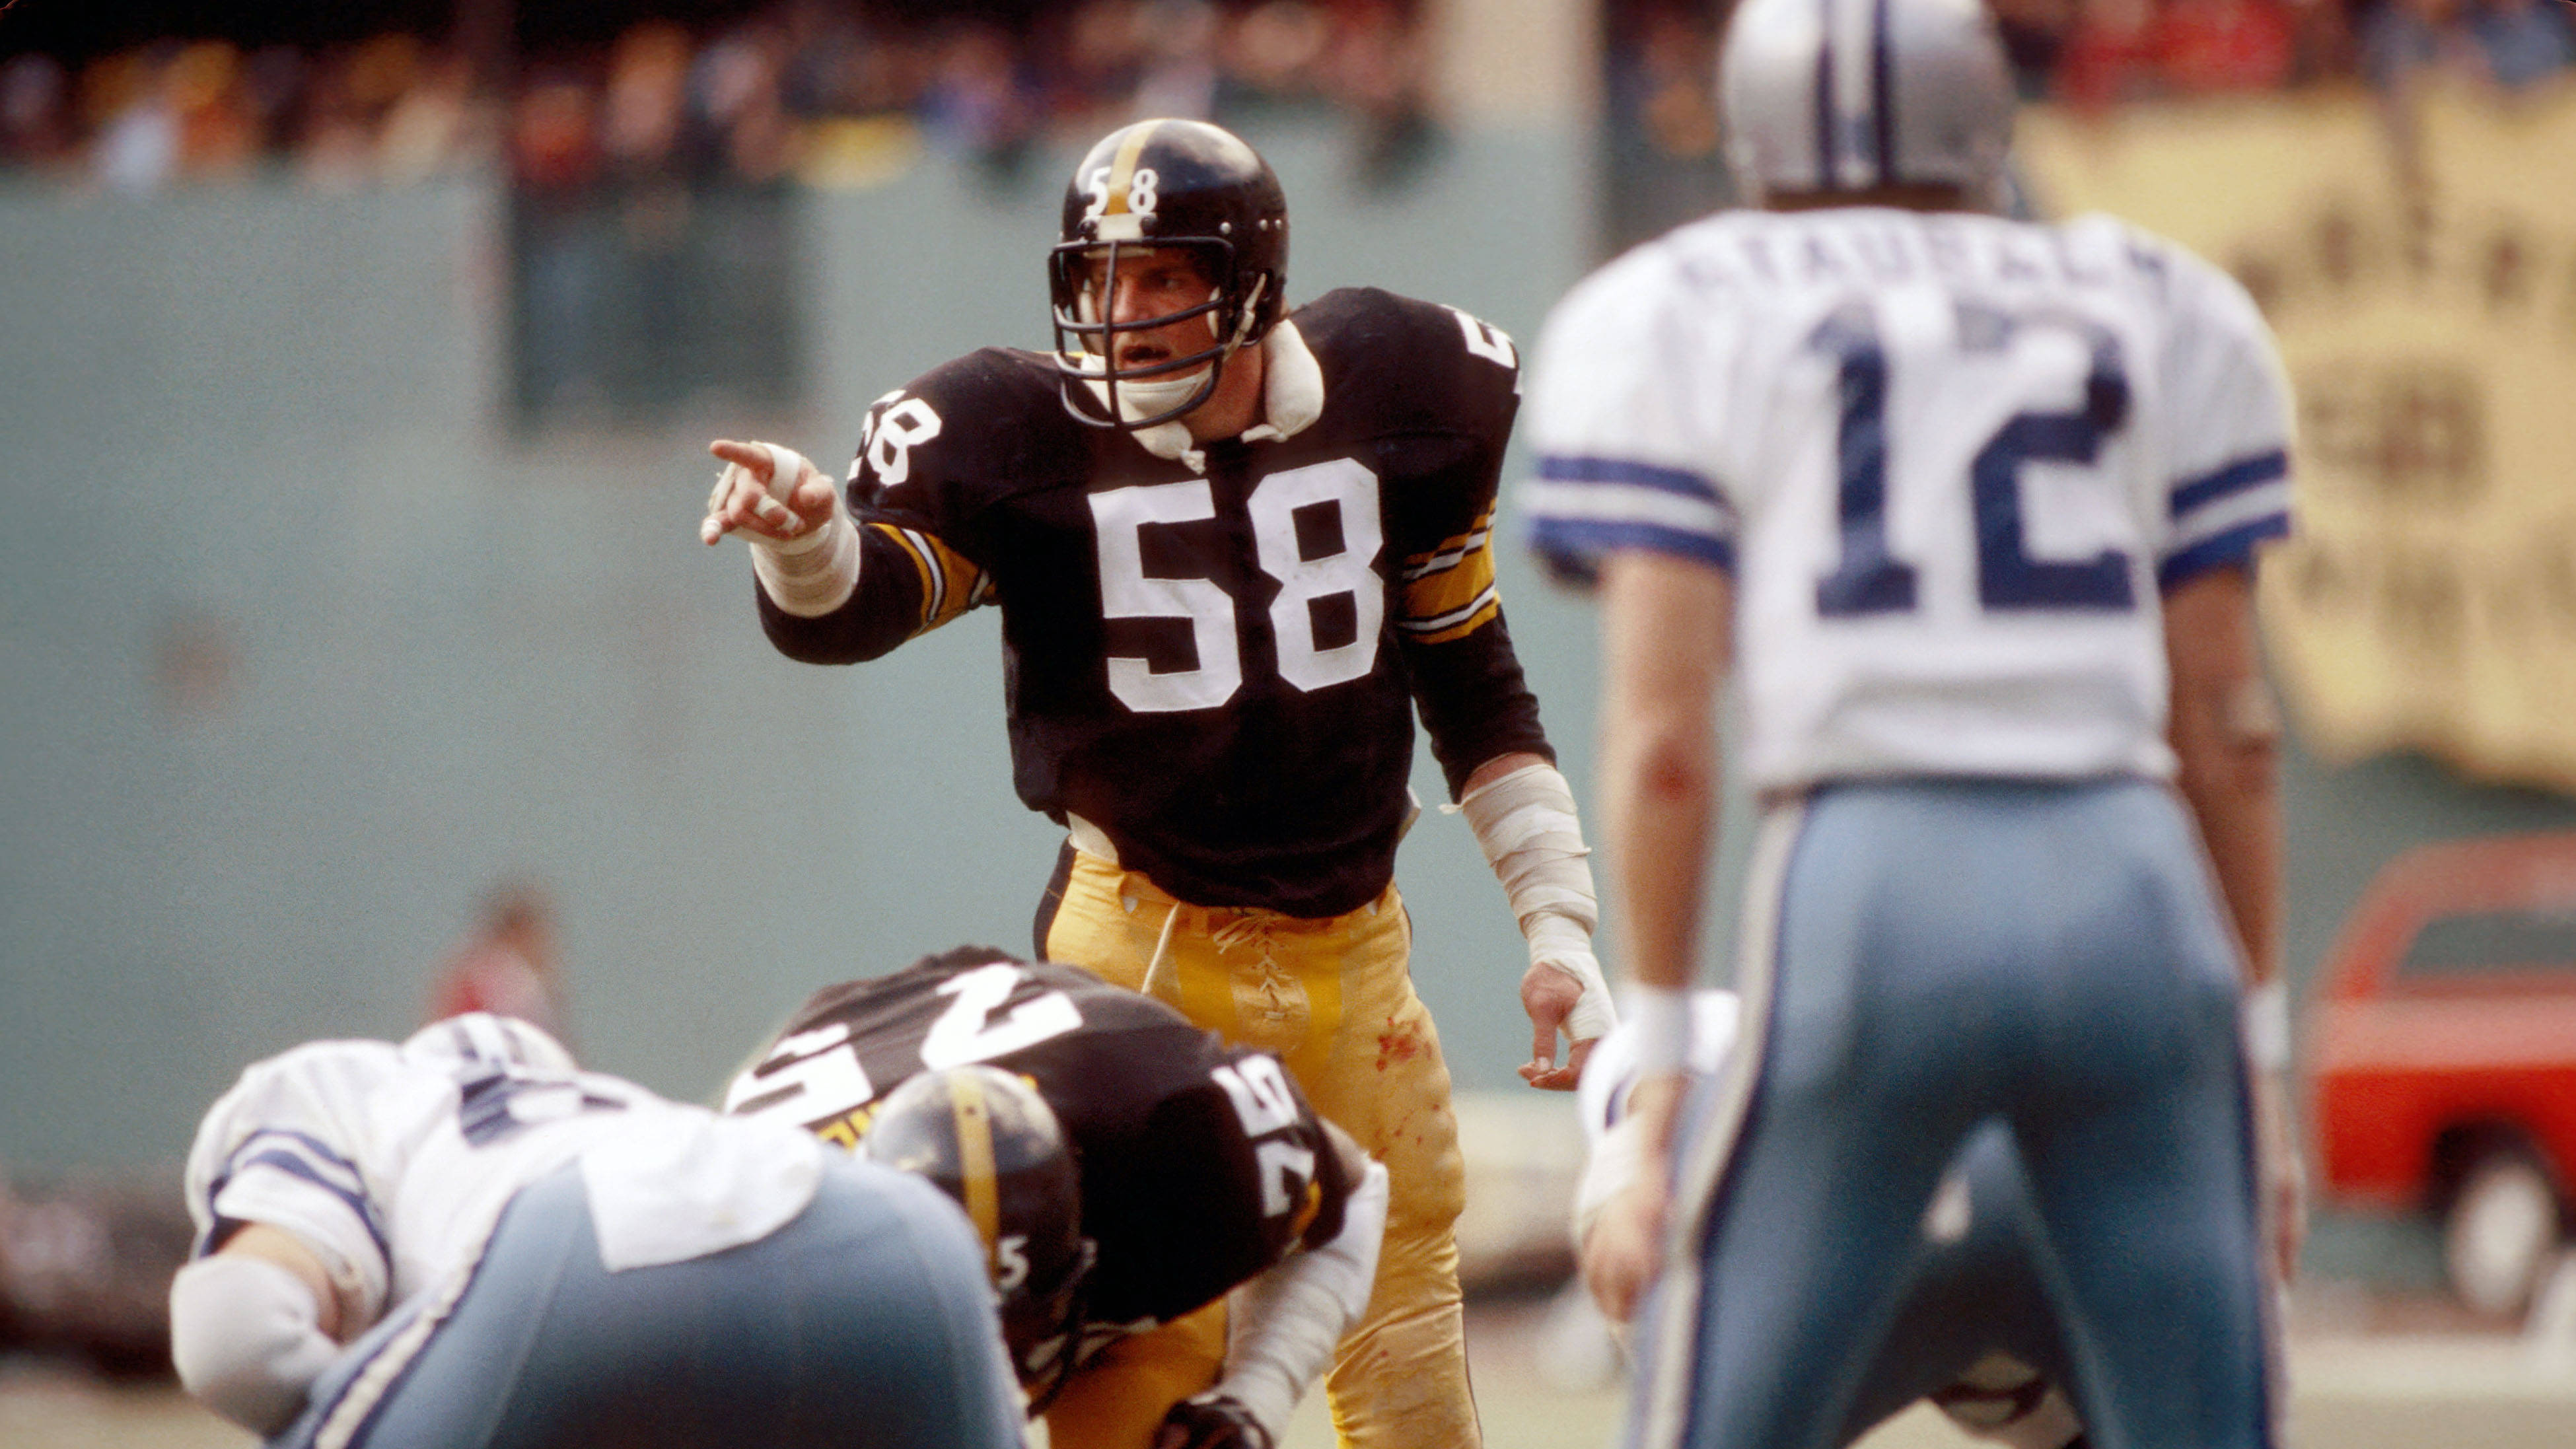 <strong>58: Jack Lambert</strong><br>Team: Pittsburgh Steelers<br>Position: Linebacker<br>Erfolge: Pro Football Hall of Famer, viermaliger Super-Bowl-Champion, NFL Defensive Player of the Year 1976, sechsmaliger First Team All-Pro, neunmaliger Pro Bowler<br>Honorable Mention: Von Miller, Derrick Thomas